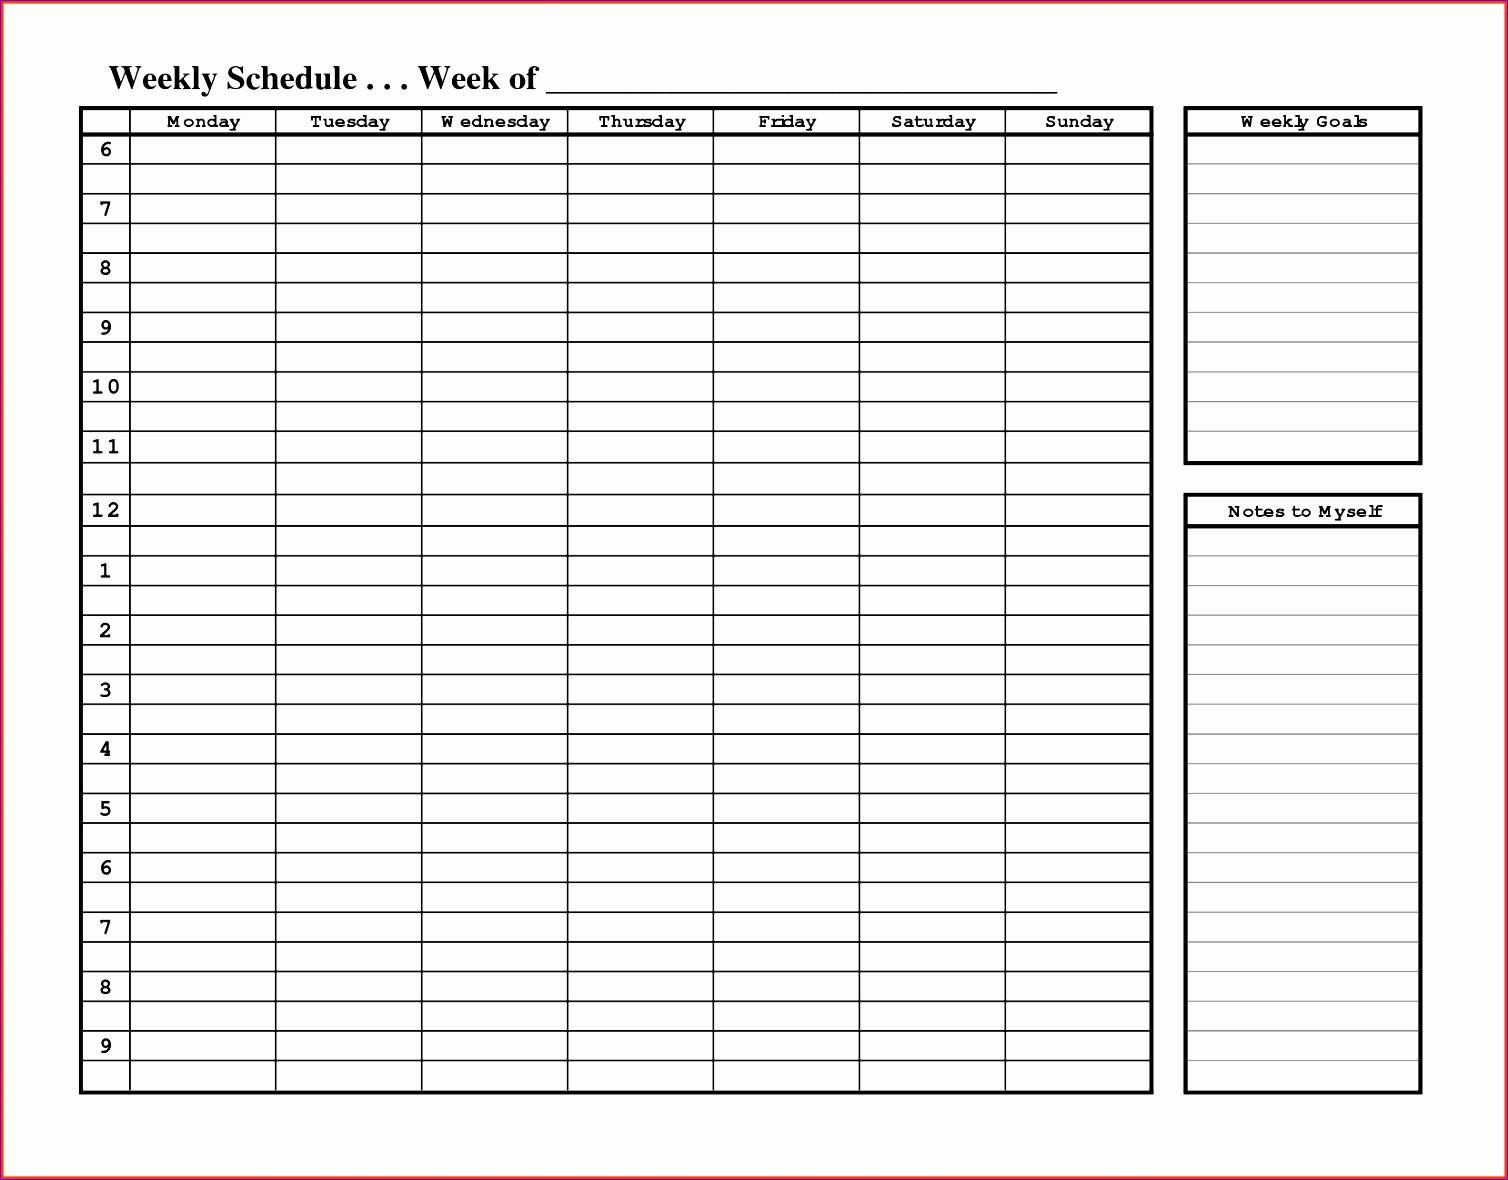 24 Hour Schedule Template Fresh 10 24 Hour Work Schedule Template Excel Exceltemplates